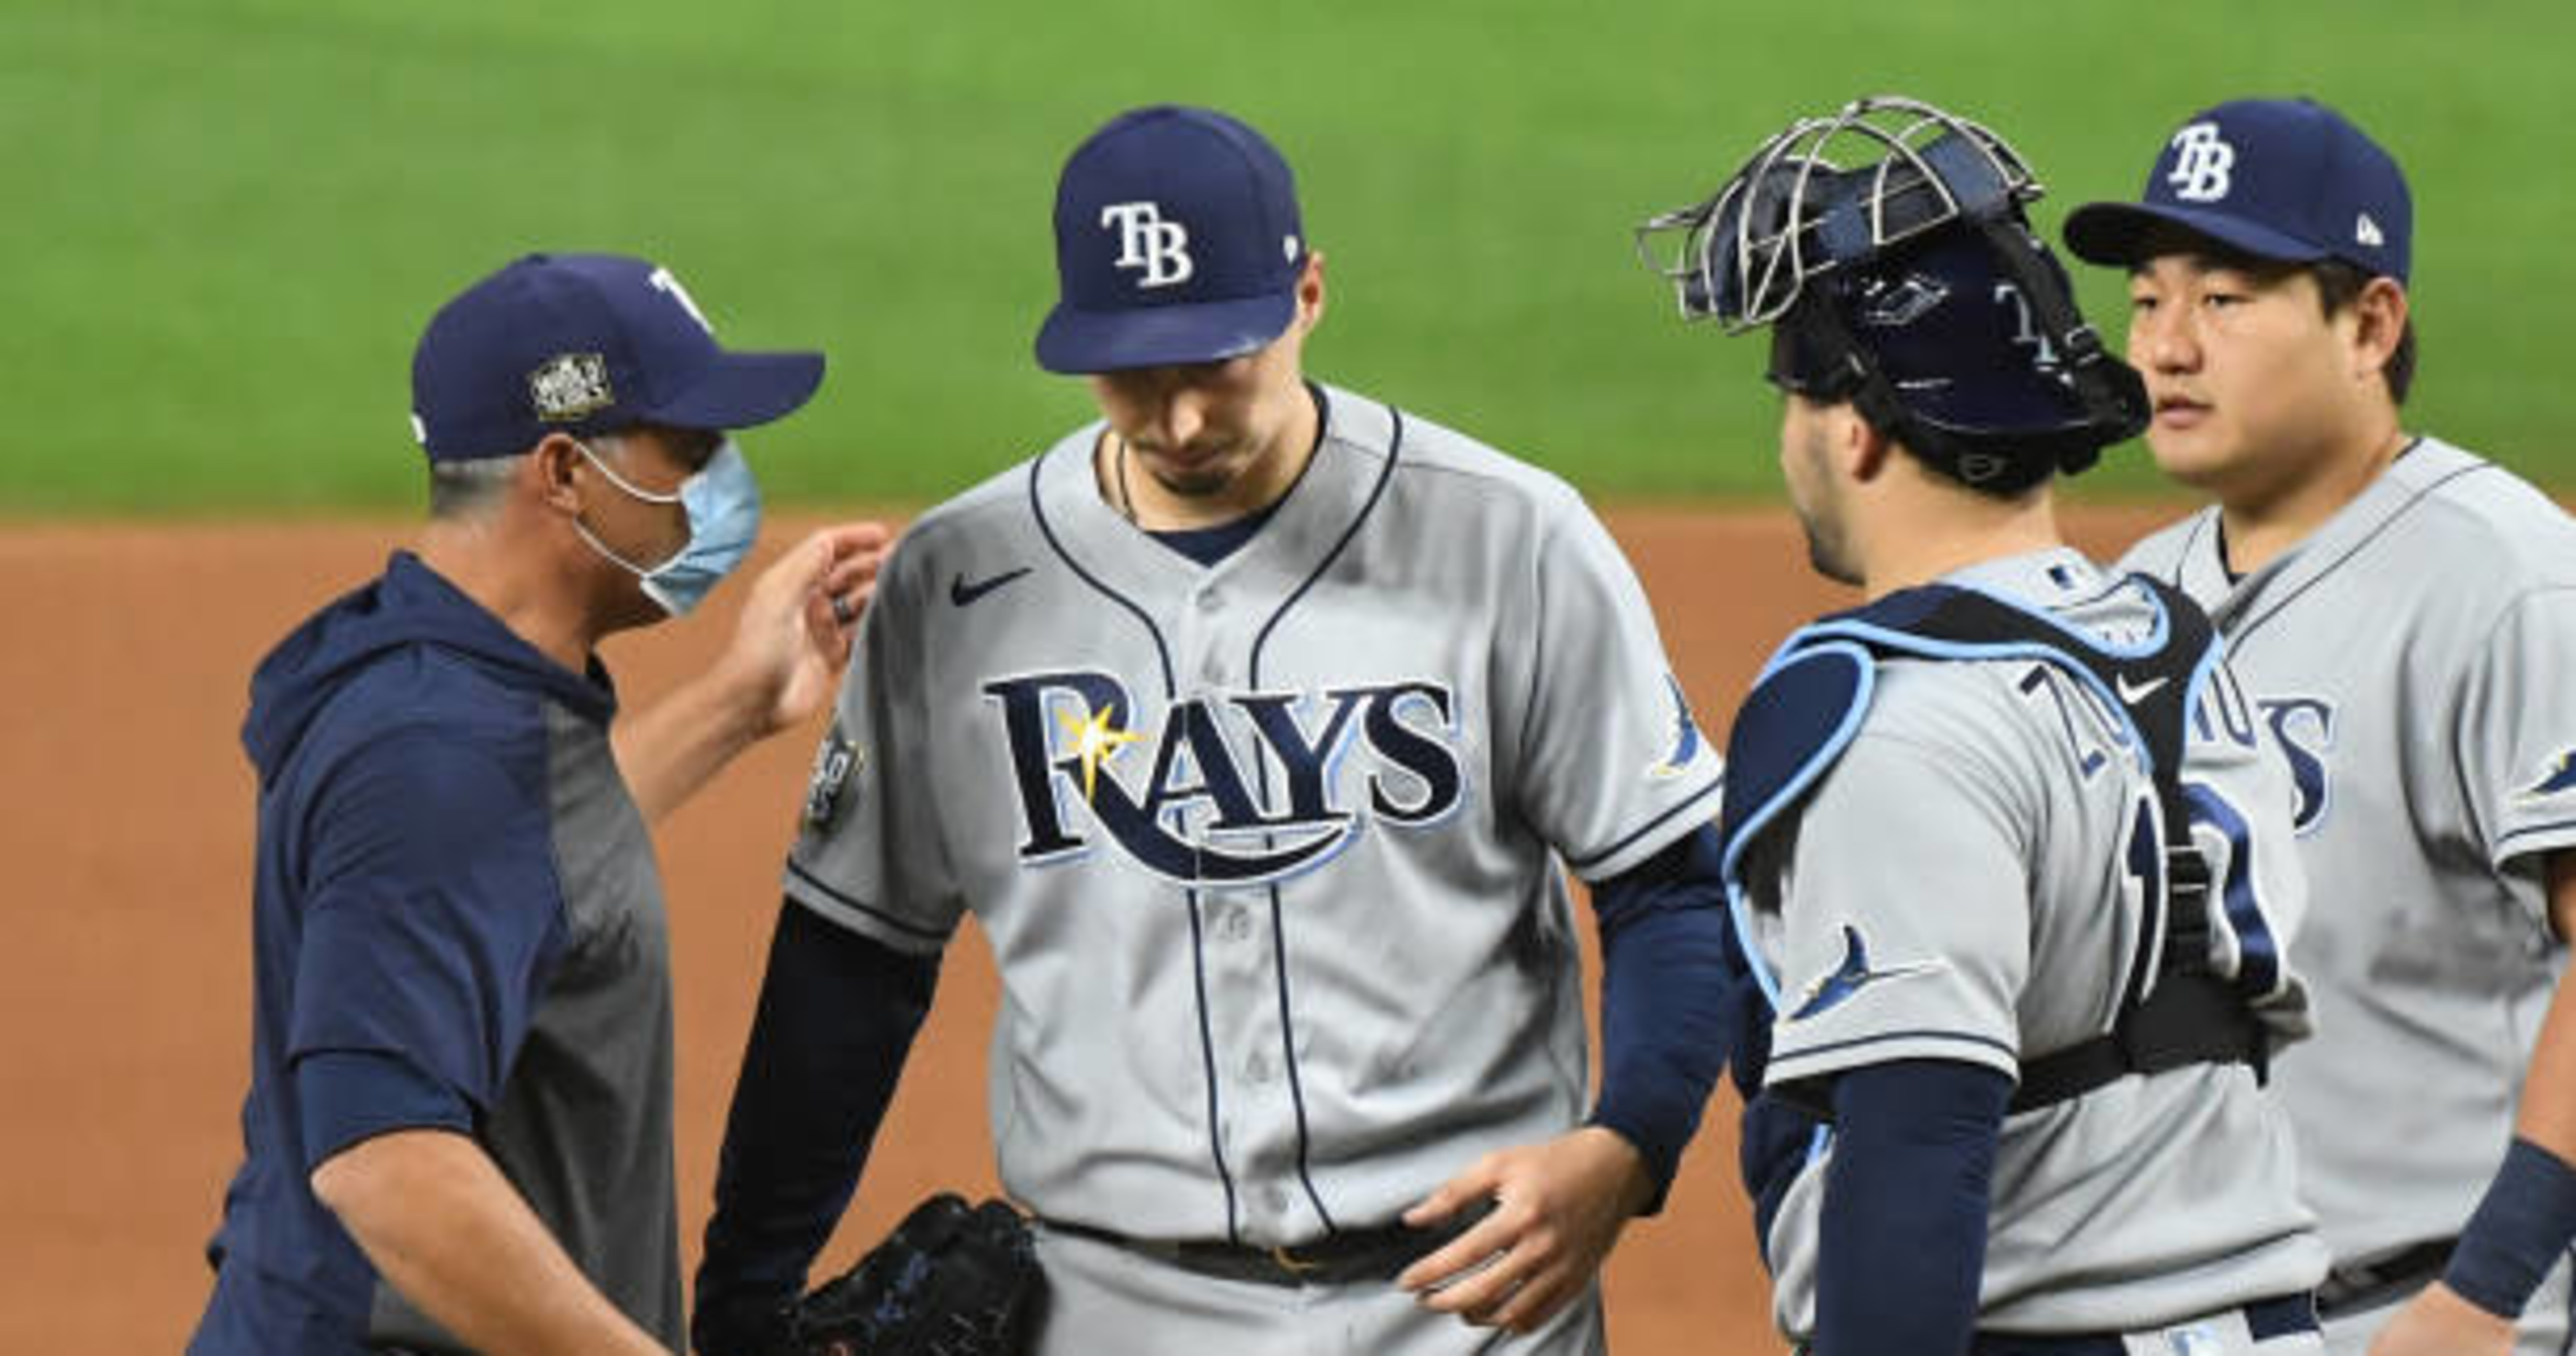 The Blake Snell Decision Isn't Why the Rays Lost the World Series